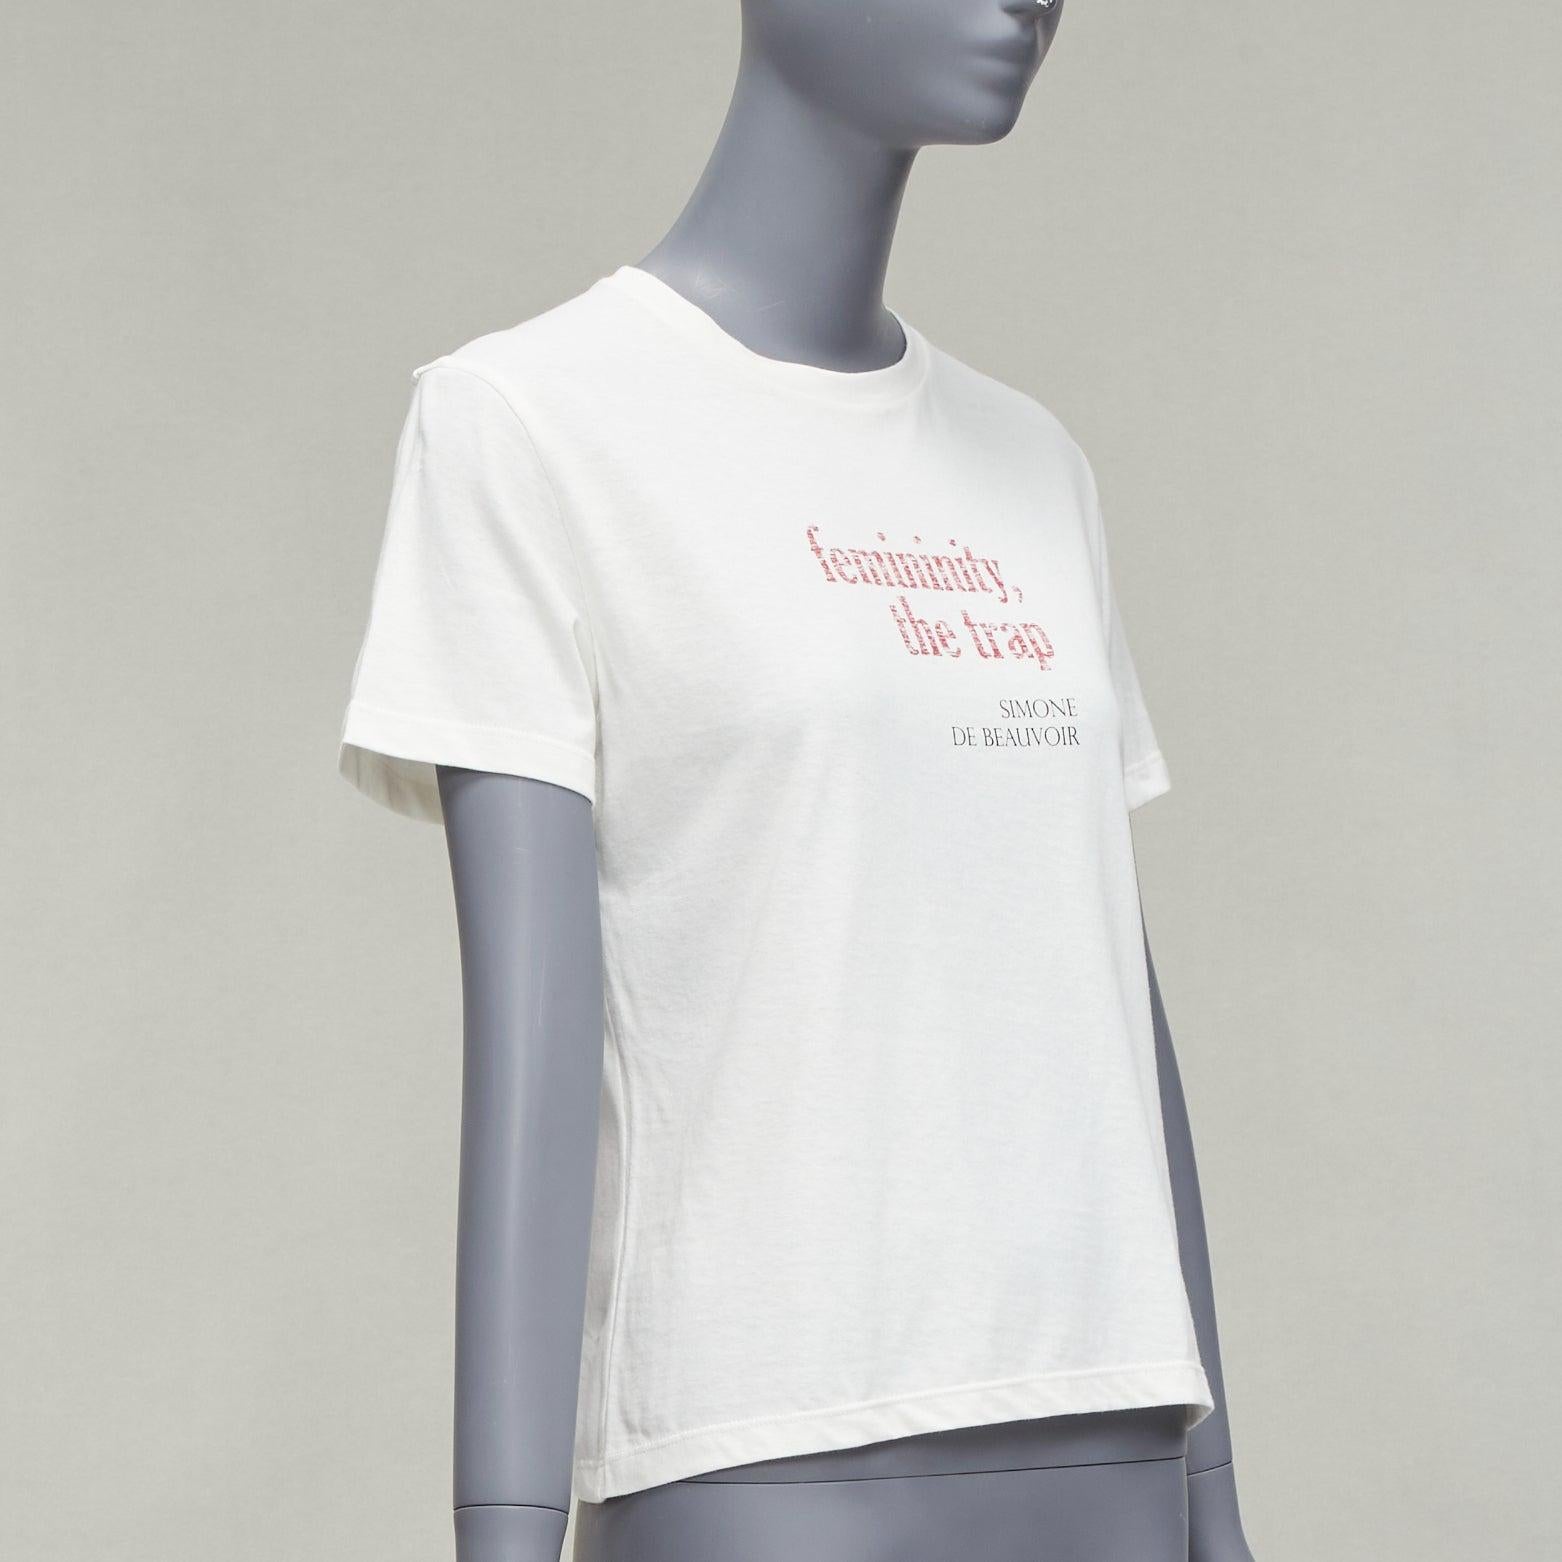 DIOR Feminity The Trap Simone De Beauvoir print white cotton linen tshirt XS In Good Condition For Sale In Hong Kong, NT